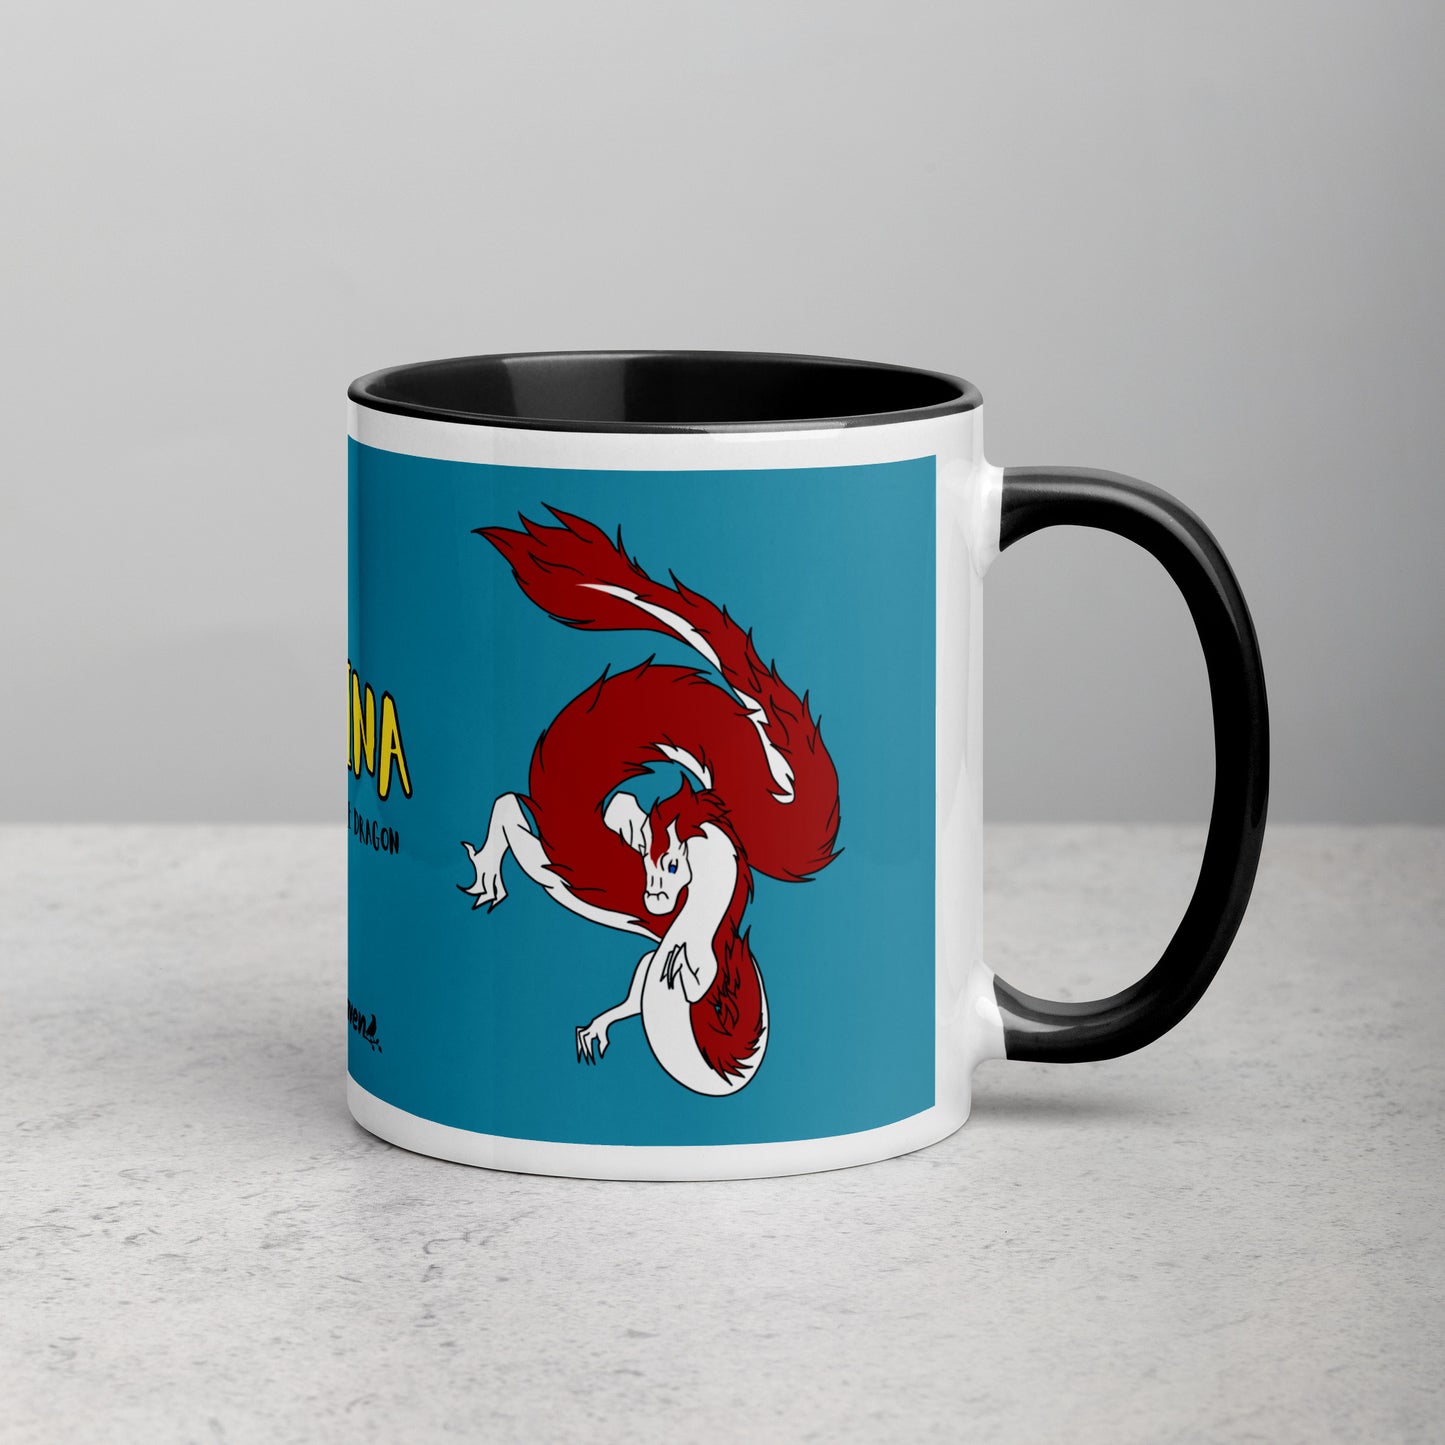 11 ounce ceramic mug with black handle, rim and inside color. Features double-sided image of Loraina the Fuzzy Noodle Dragon on a dark blue background. Mug is microwave and dishwasher safe.